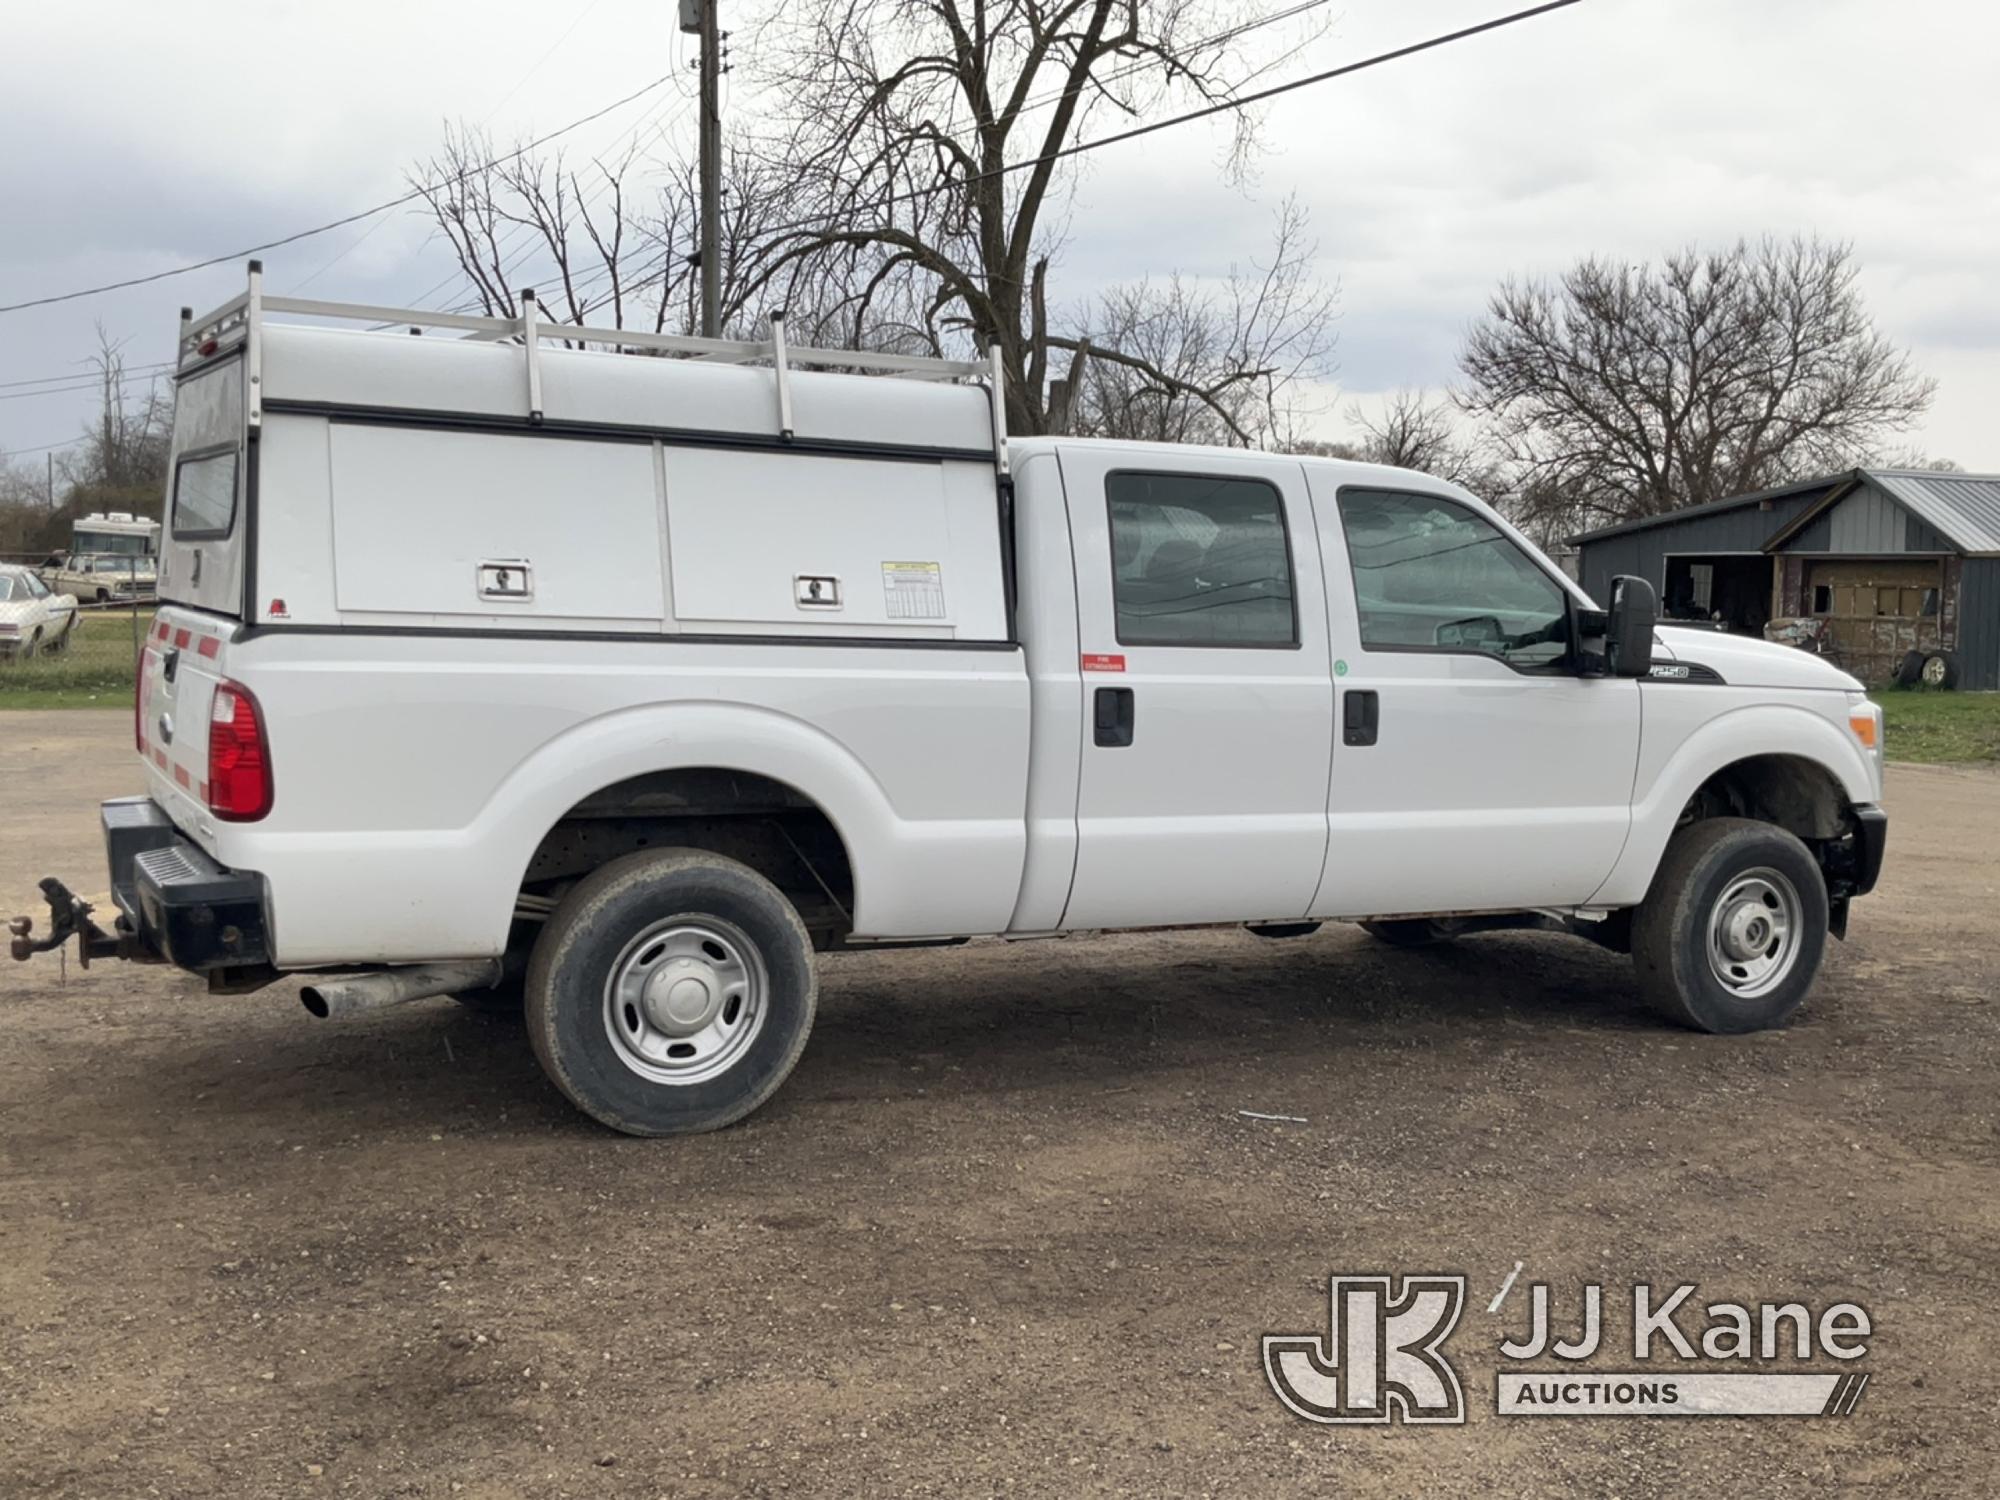 (South Beloit, IL) 2015 Ford F250 4x4 Crew-Cab Pickup Truck Runs & Moves) (Paint Damage, Seller Stat